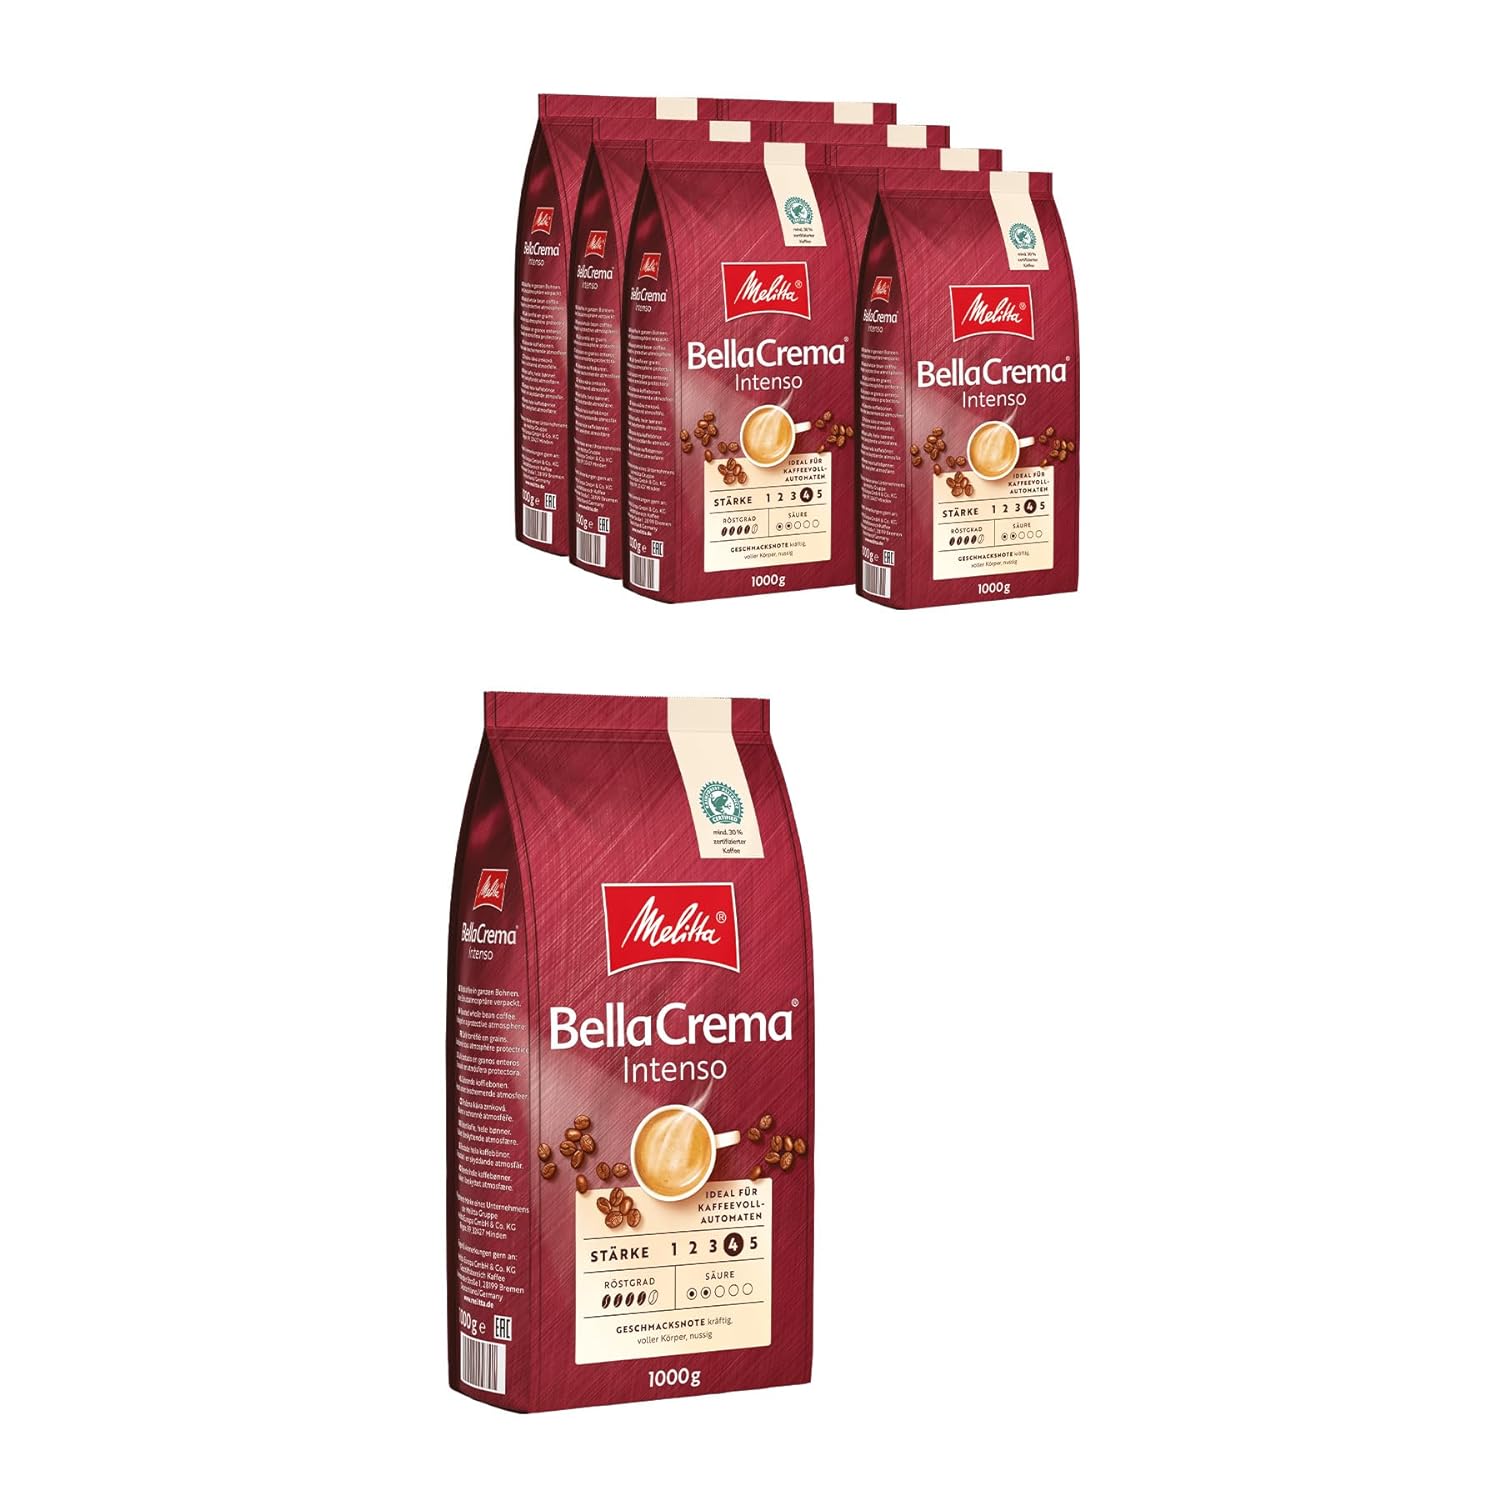 Melitta Bellacrema Intego Whole Coffee Beans 8 x 1 kg, unground, Coffee Beans for Fully Automatic Coffee, Strong Roasting, Roasted in Germany, Strength 4, in Tray